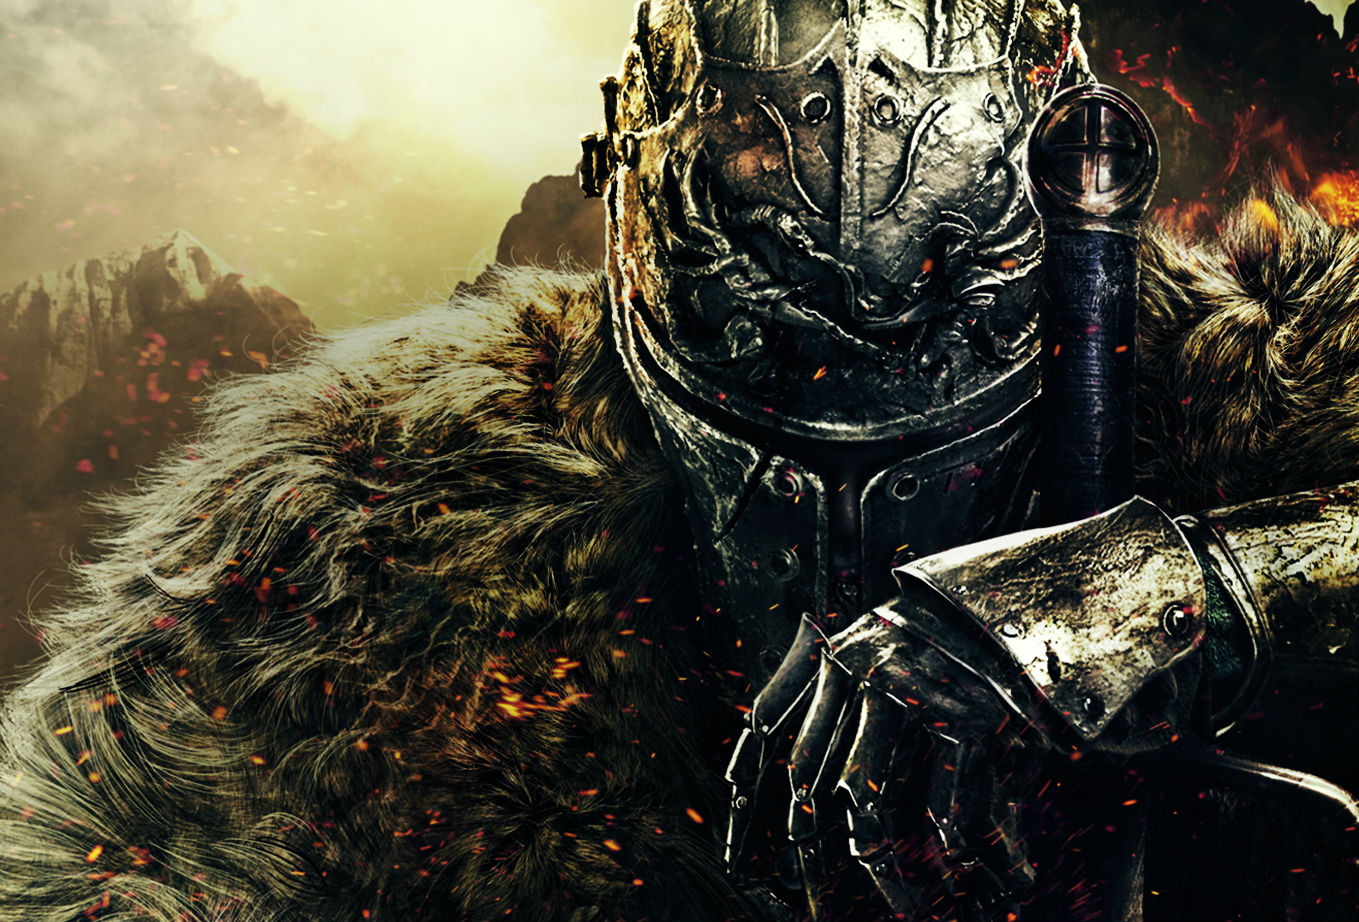 Dark Souls II: Scholar of the First Sin upgrade info + systems specs